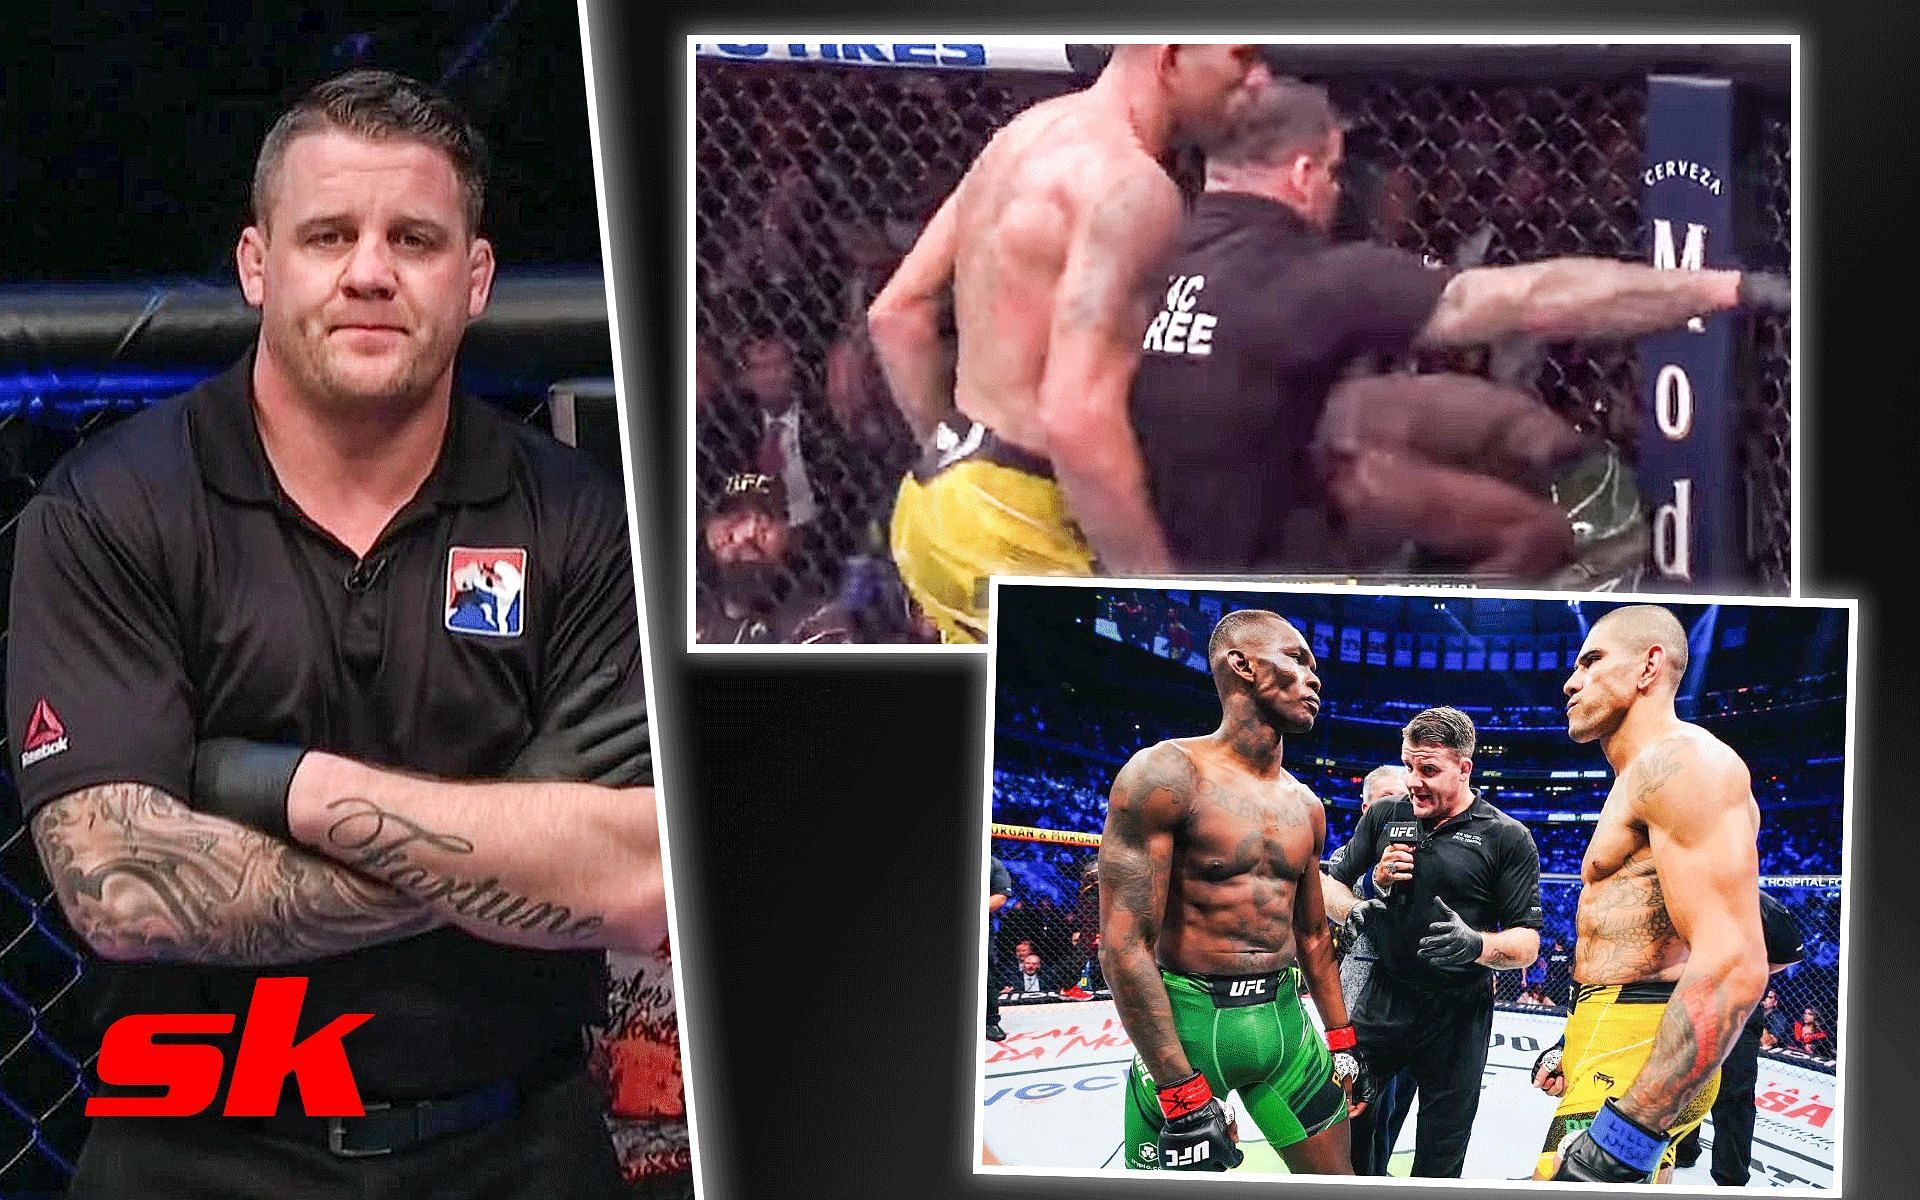 Marc Goddard (left) and Alex Pereira vs. Israel Adesanya (right). [Images courtesy: top right image from Instagram @alexpoatanpereira and rest of the images from Instagram @marcgoddard_uk]